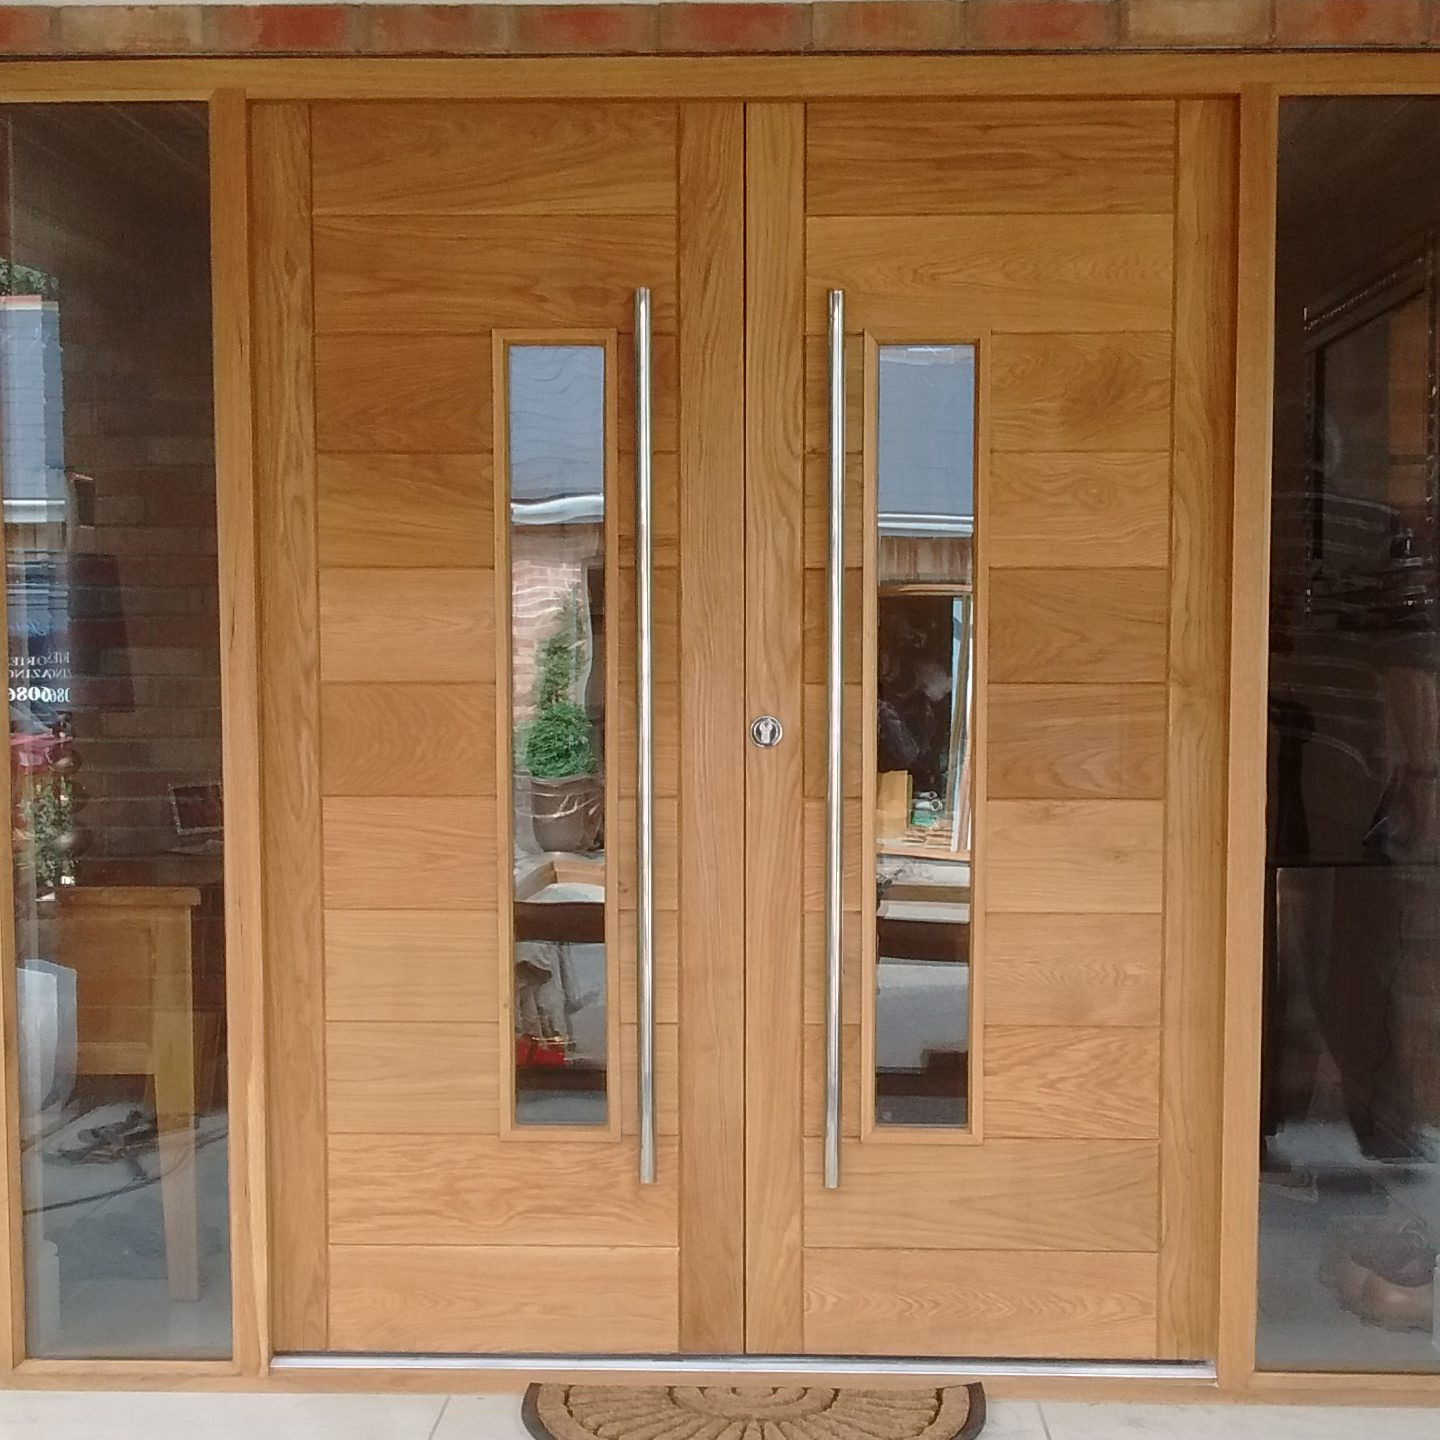 Traditionally Crafted Doors